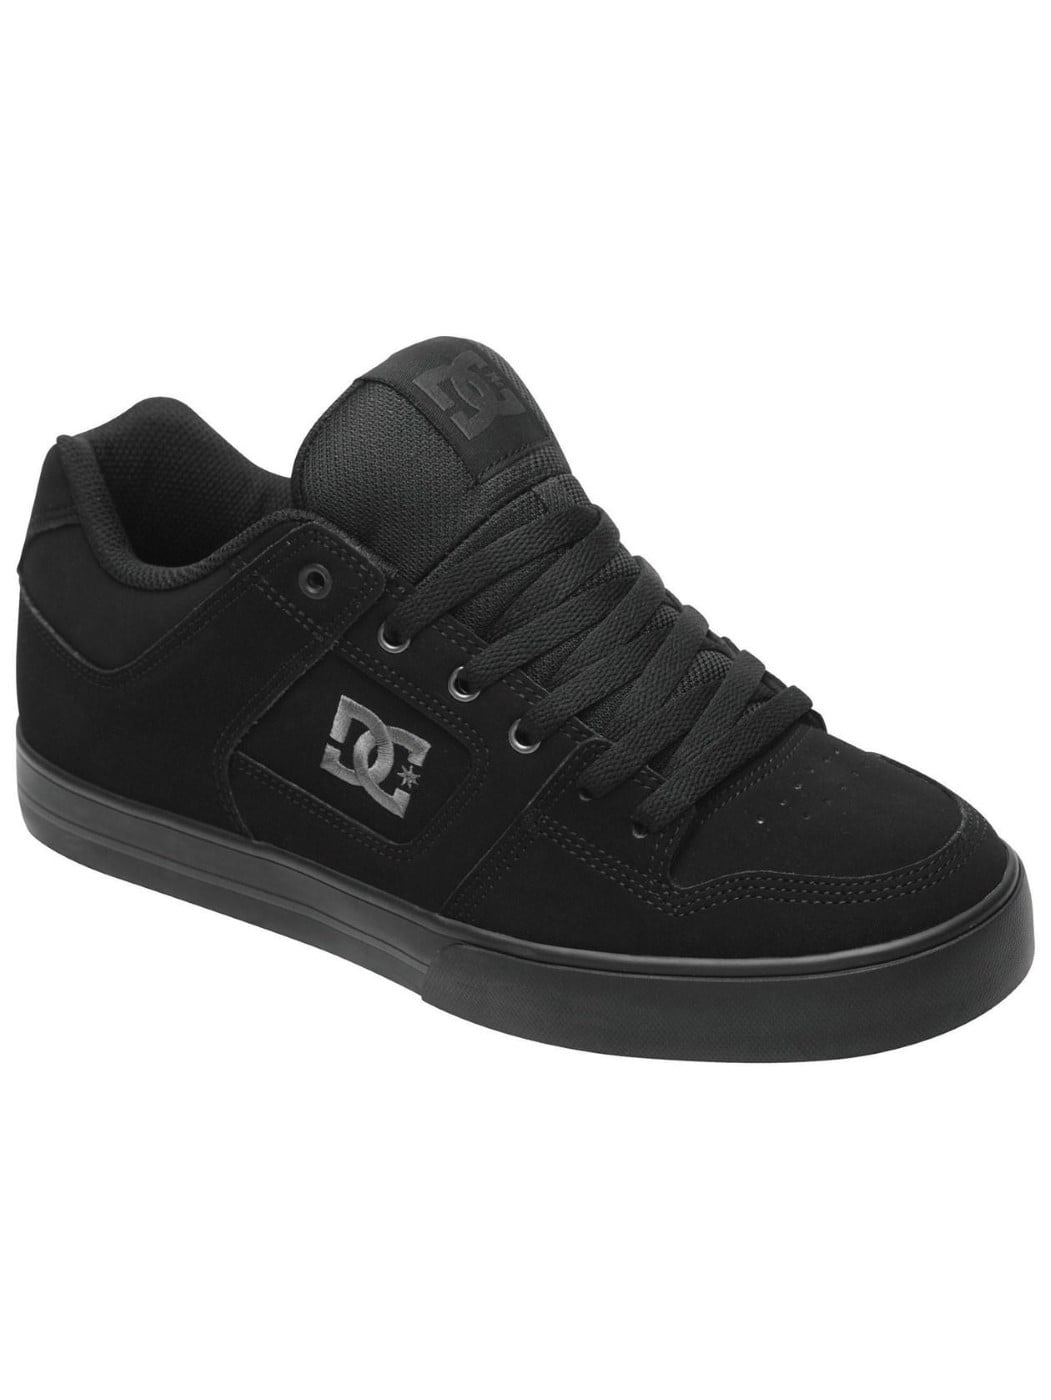 DC Pure 300660 Mens Gray Canvas Lace Up Skate Inspired Sneakers Shoes 8 